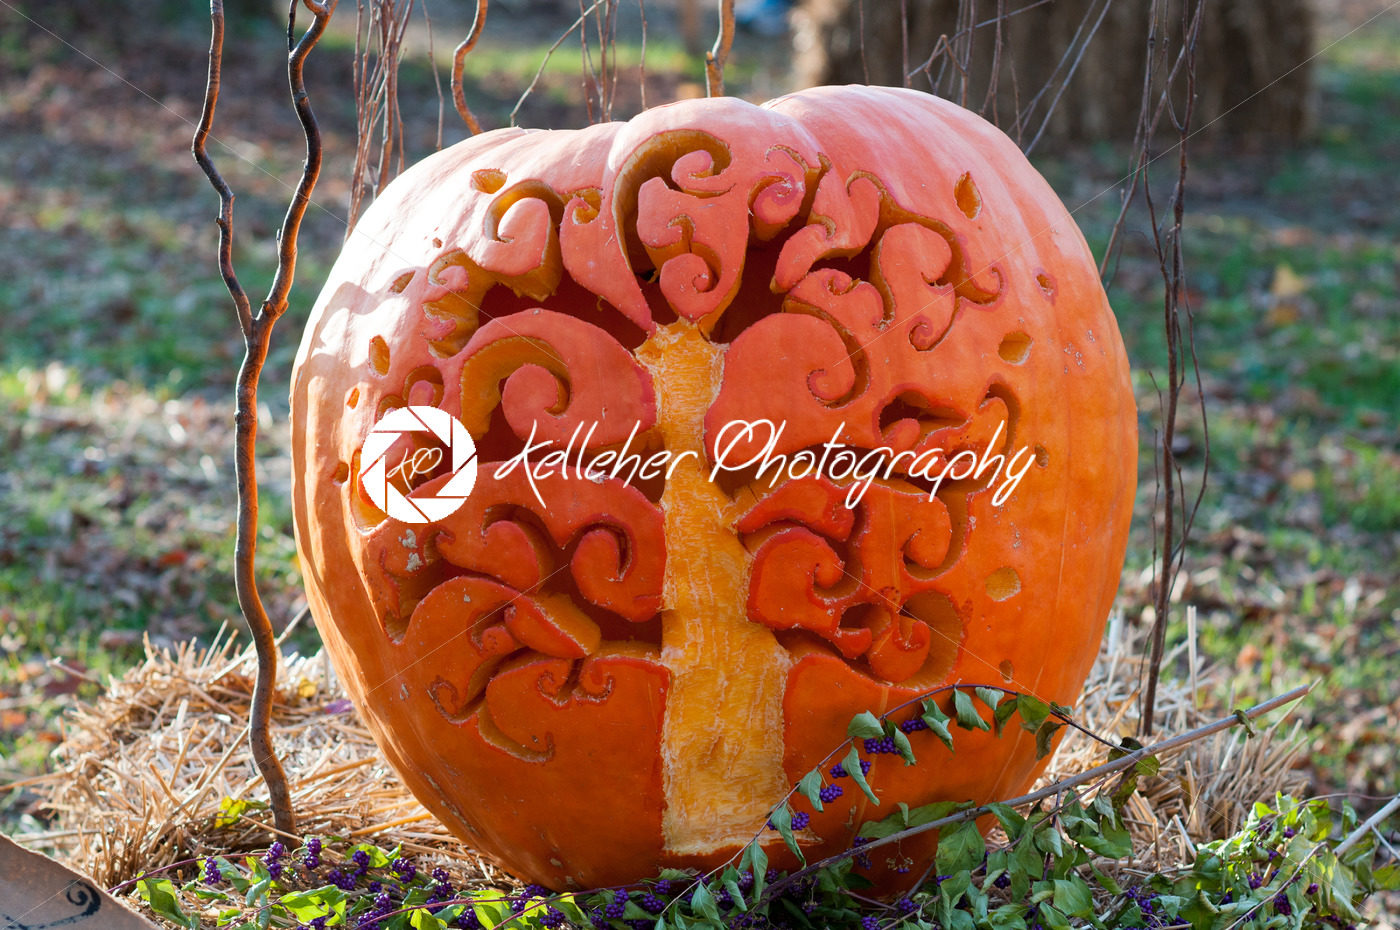 CHADDS FORD, PA – OCTOBER 26: Tree Pumpkin at The Great Pumpkin Carve carving contest on October 26, 2013 - Kelleher Photography Store